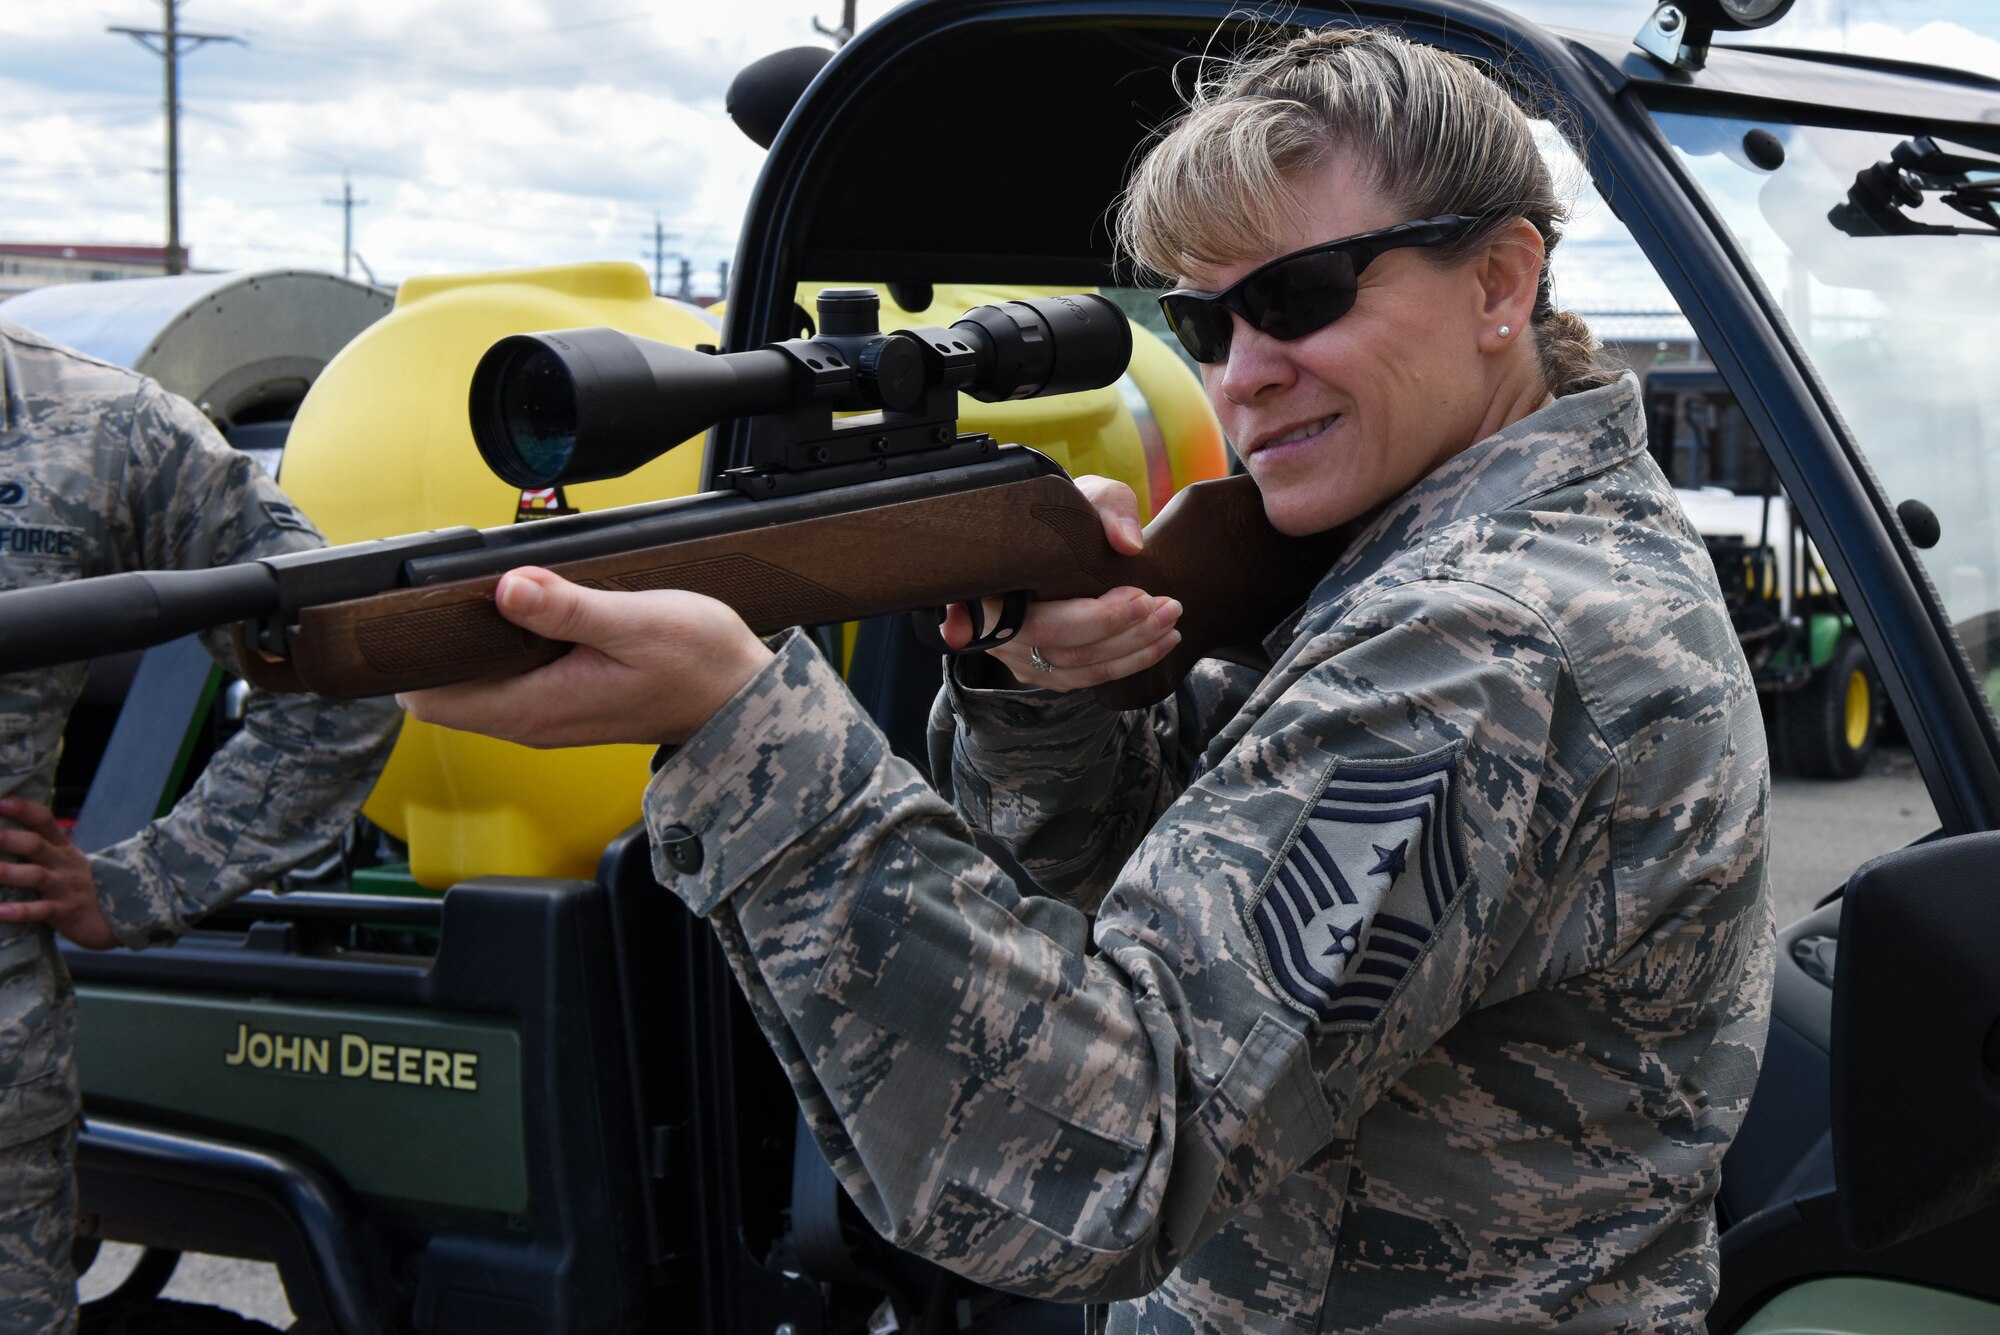 Chief Master Sgt. Theresa Clapper, 2nd Bomb Wing command chief, shoots a pellet rifle while visiting the 2nd Civil Engineer Squadron Pest Management office, May 24, 2017. Pest management uses riffles to help control the wildlife populations of animals such as raccoons or opossums on base. (U.S. Air Force photo/Airman 1st Class Sydney Bennett)